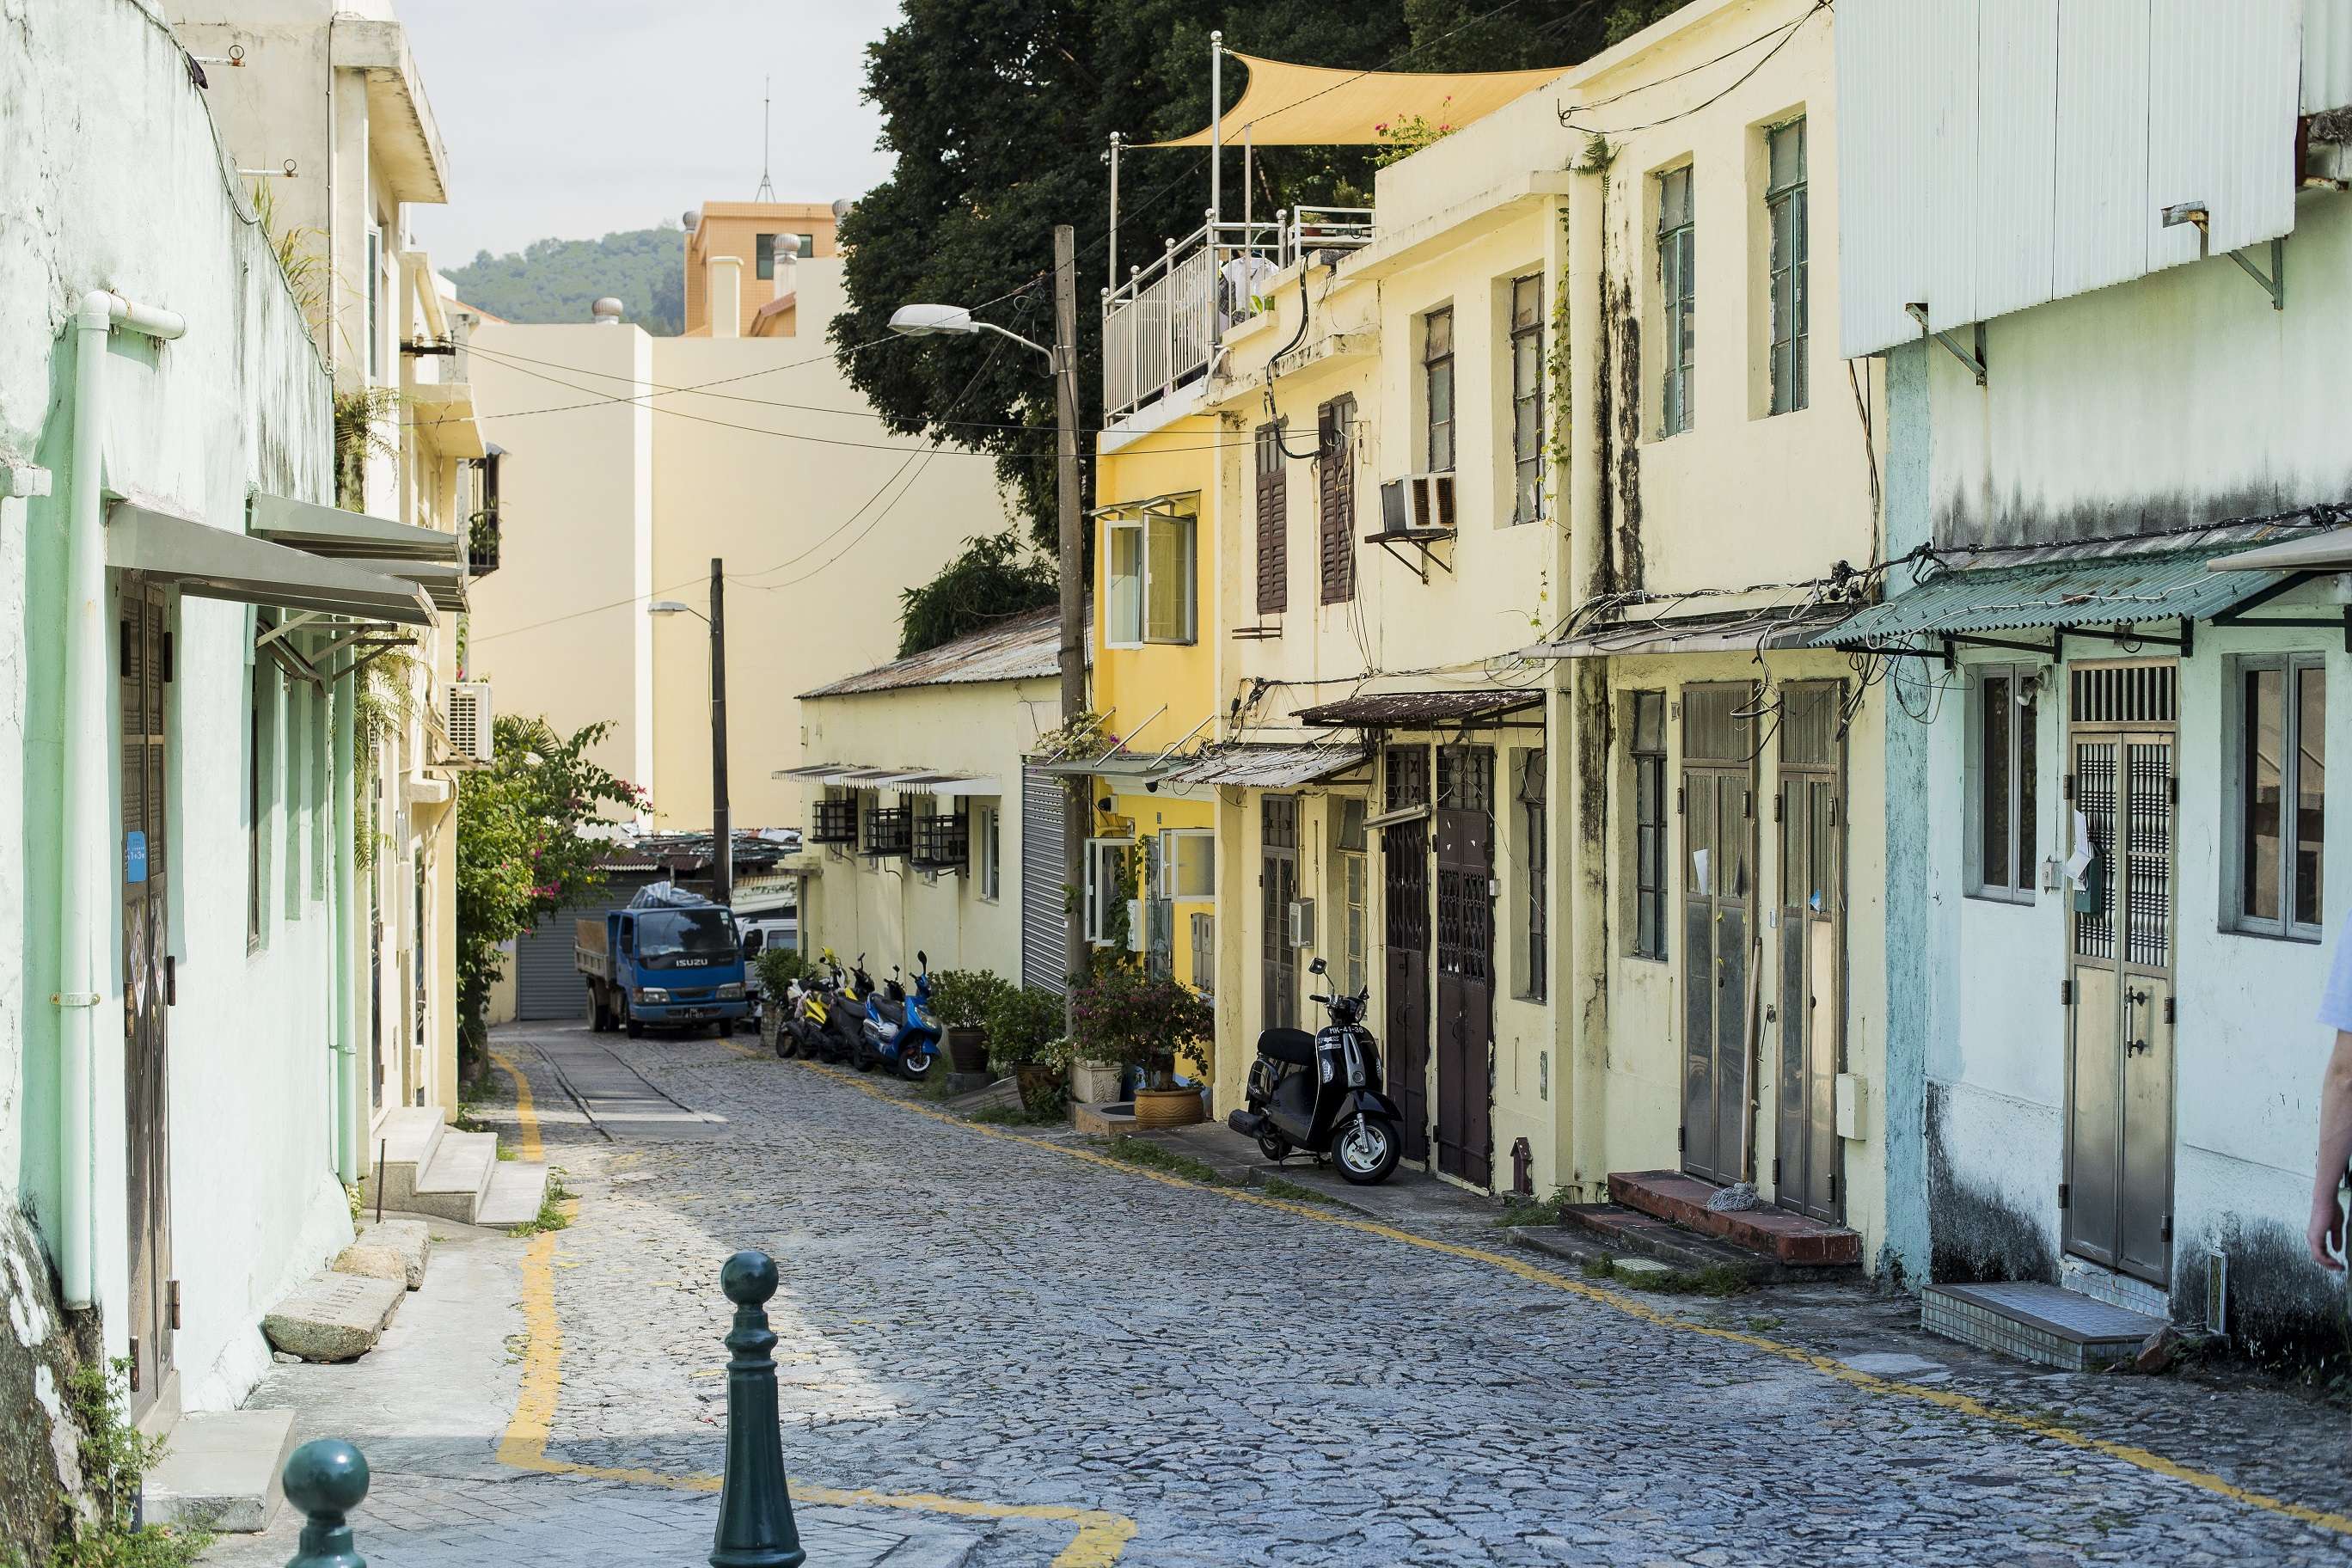 Once a busy fishing village, Taipa Village is fast becoming a favourite destination for foodies. Photo: Harold de Puymorin